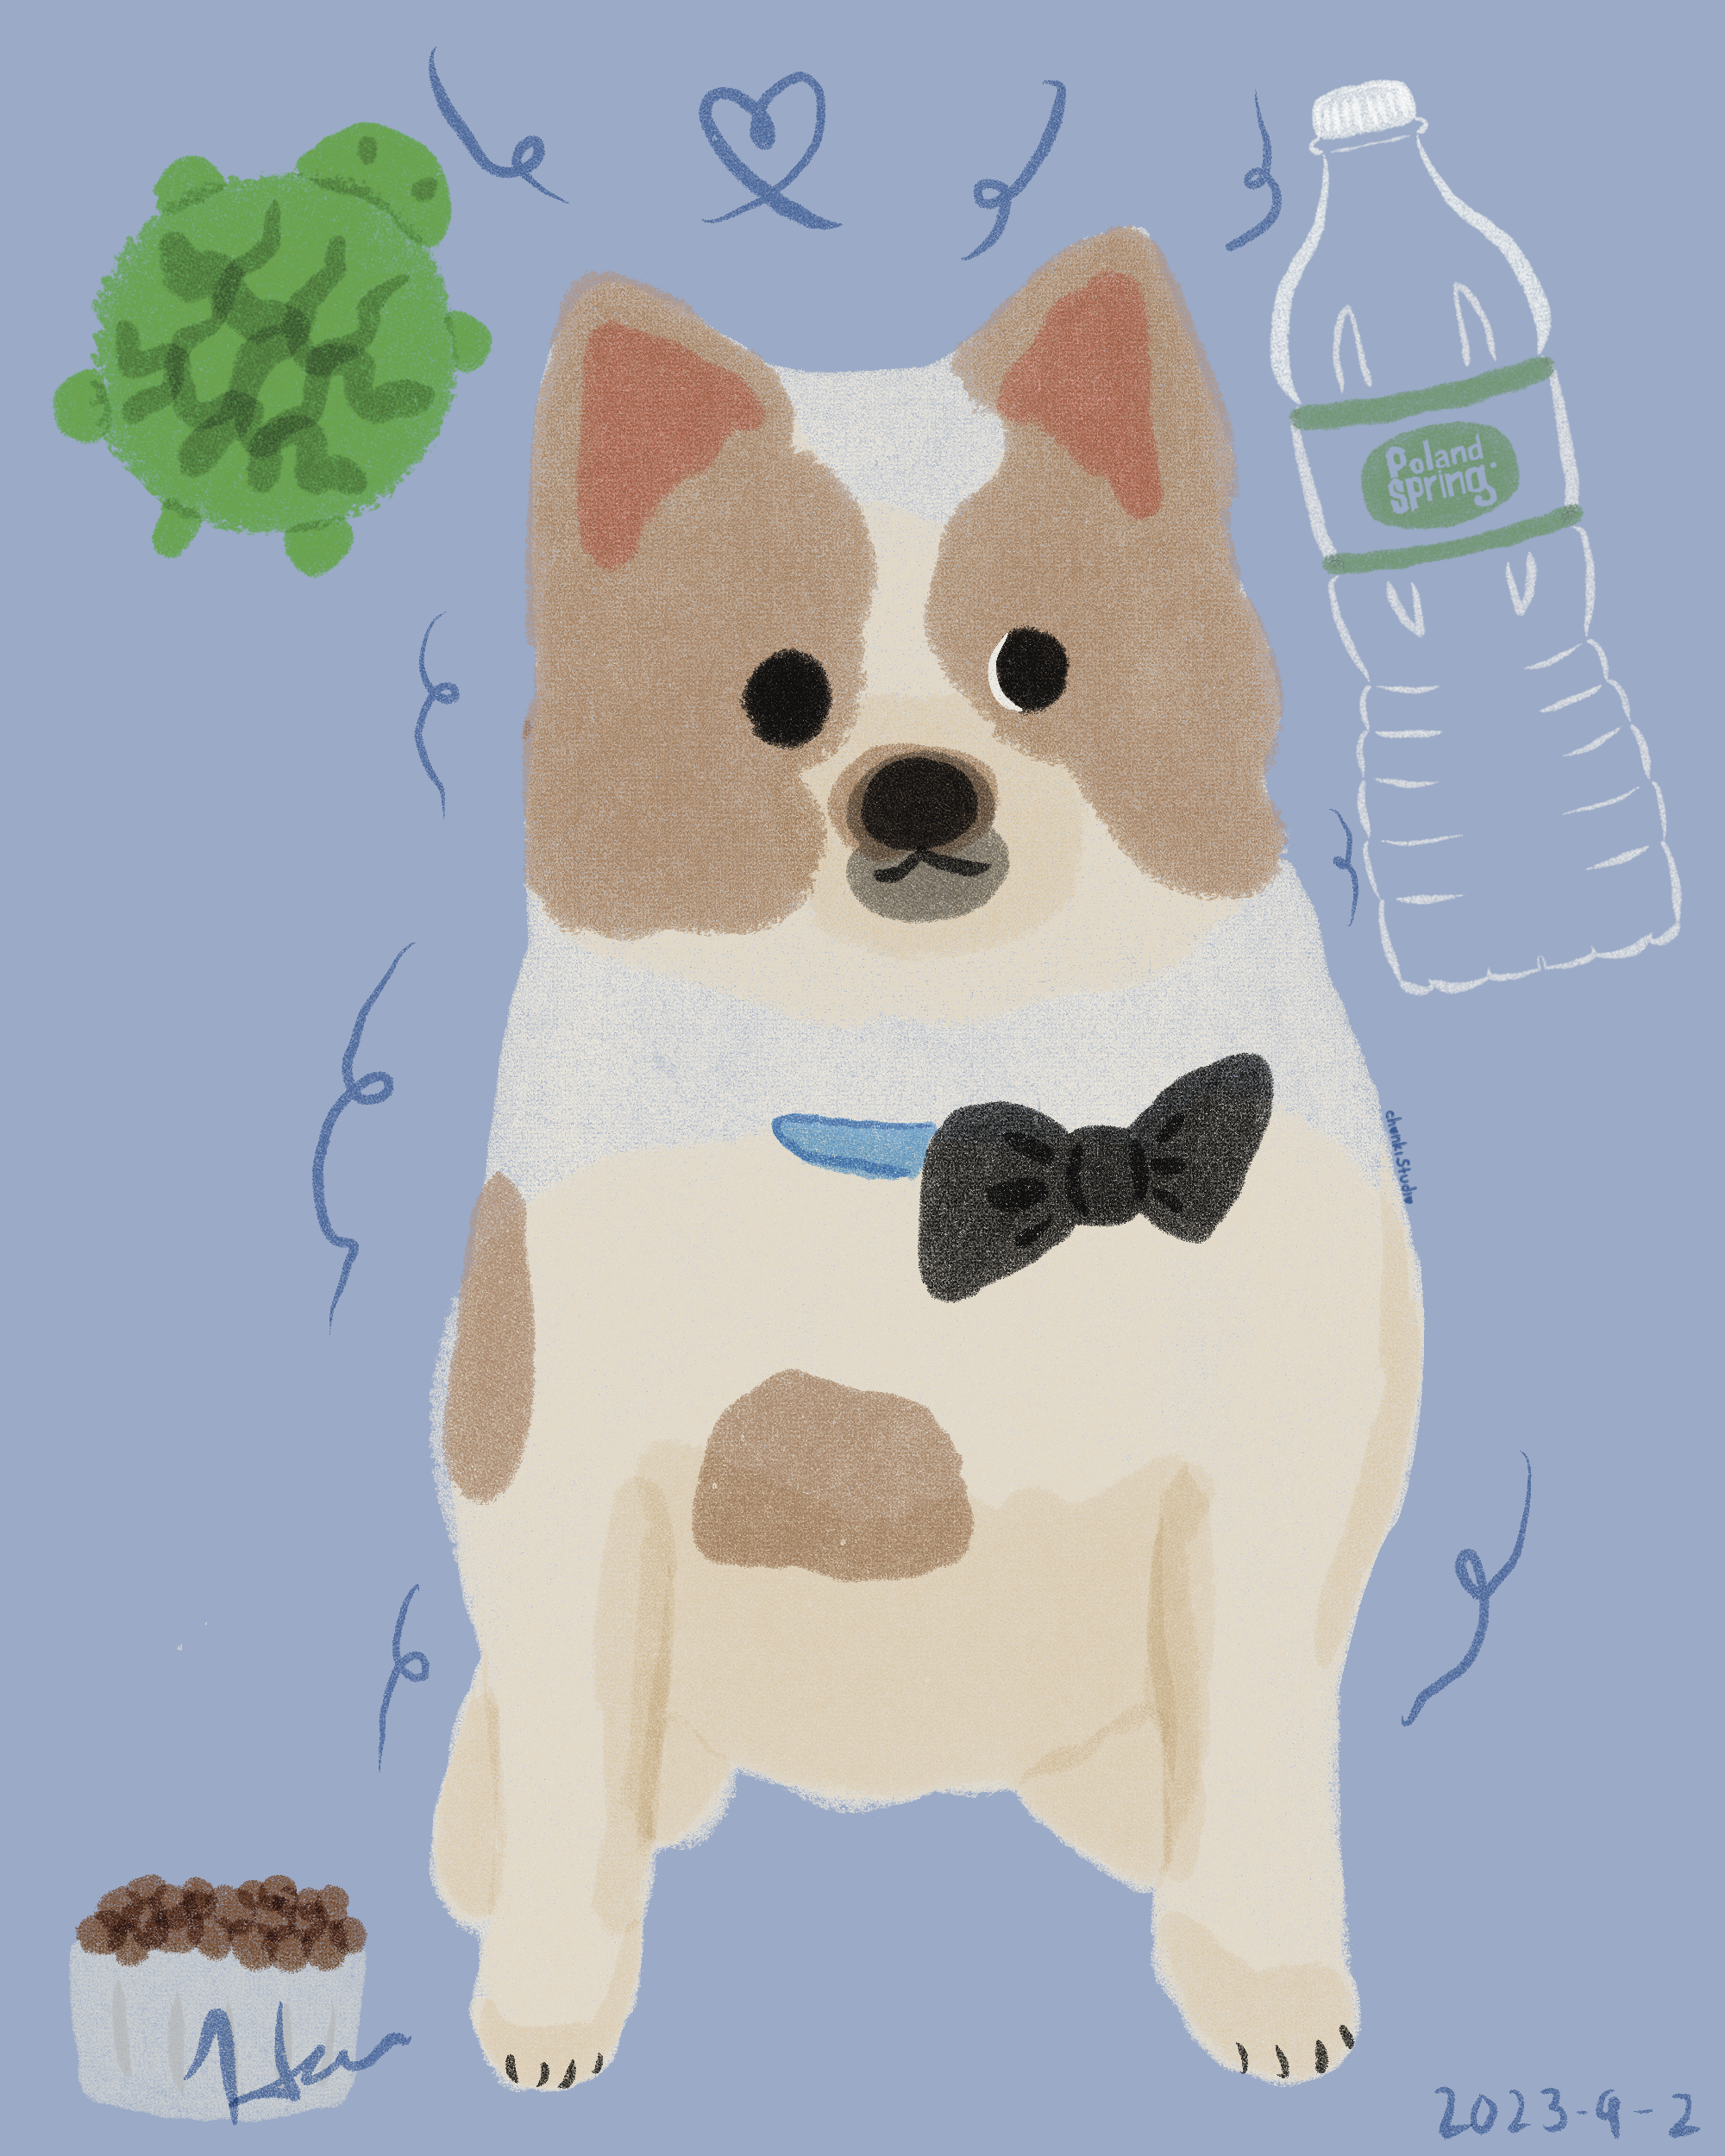 Risography style art print drawn by Hue of a pomeranian with food, a turtle toy, and a water bottle.